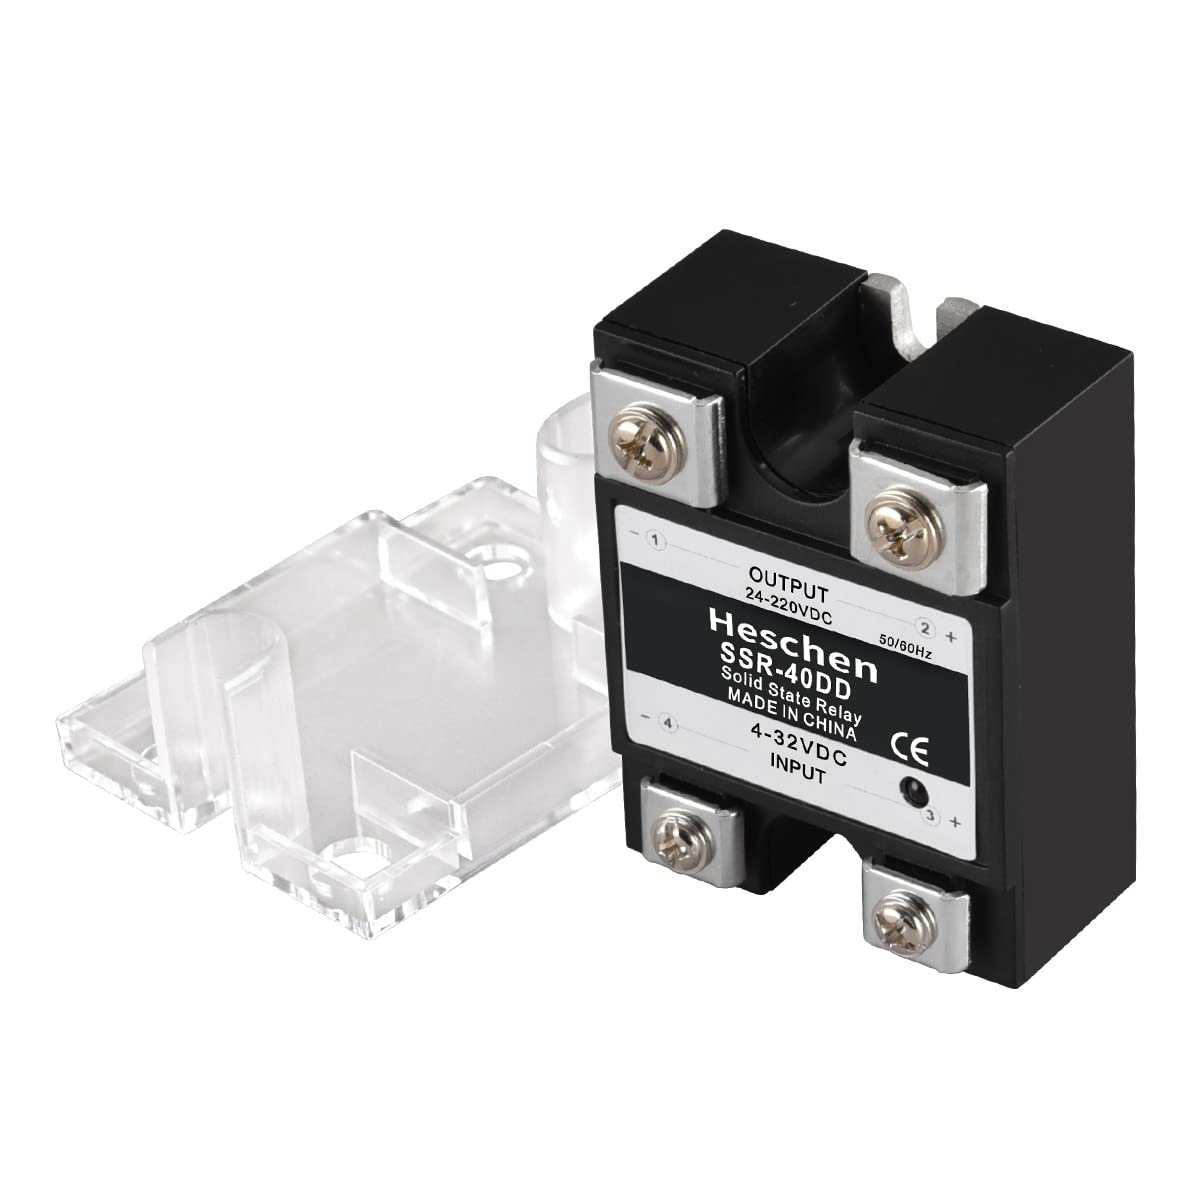 Heschen Single Phase DC Solid State Relay SSR-40DD VDC/24-220VDC 40A